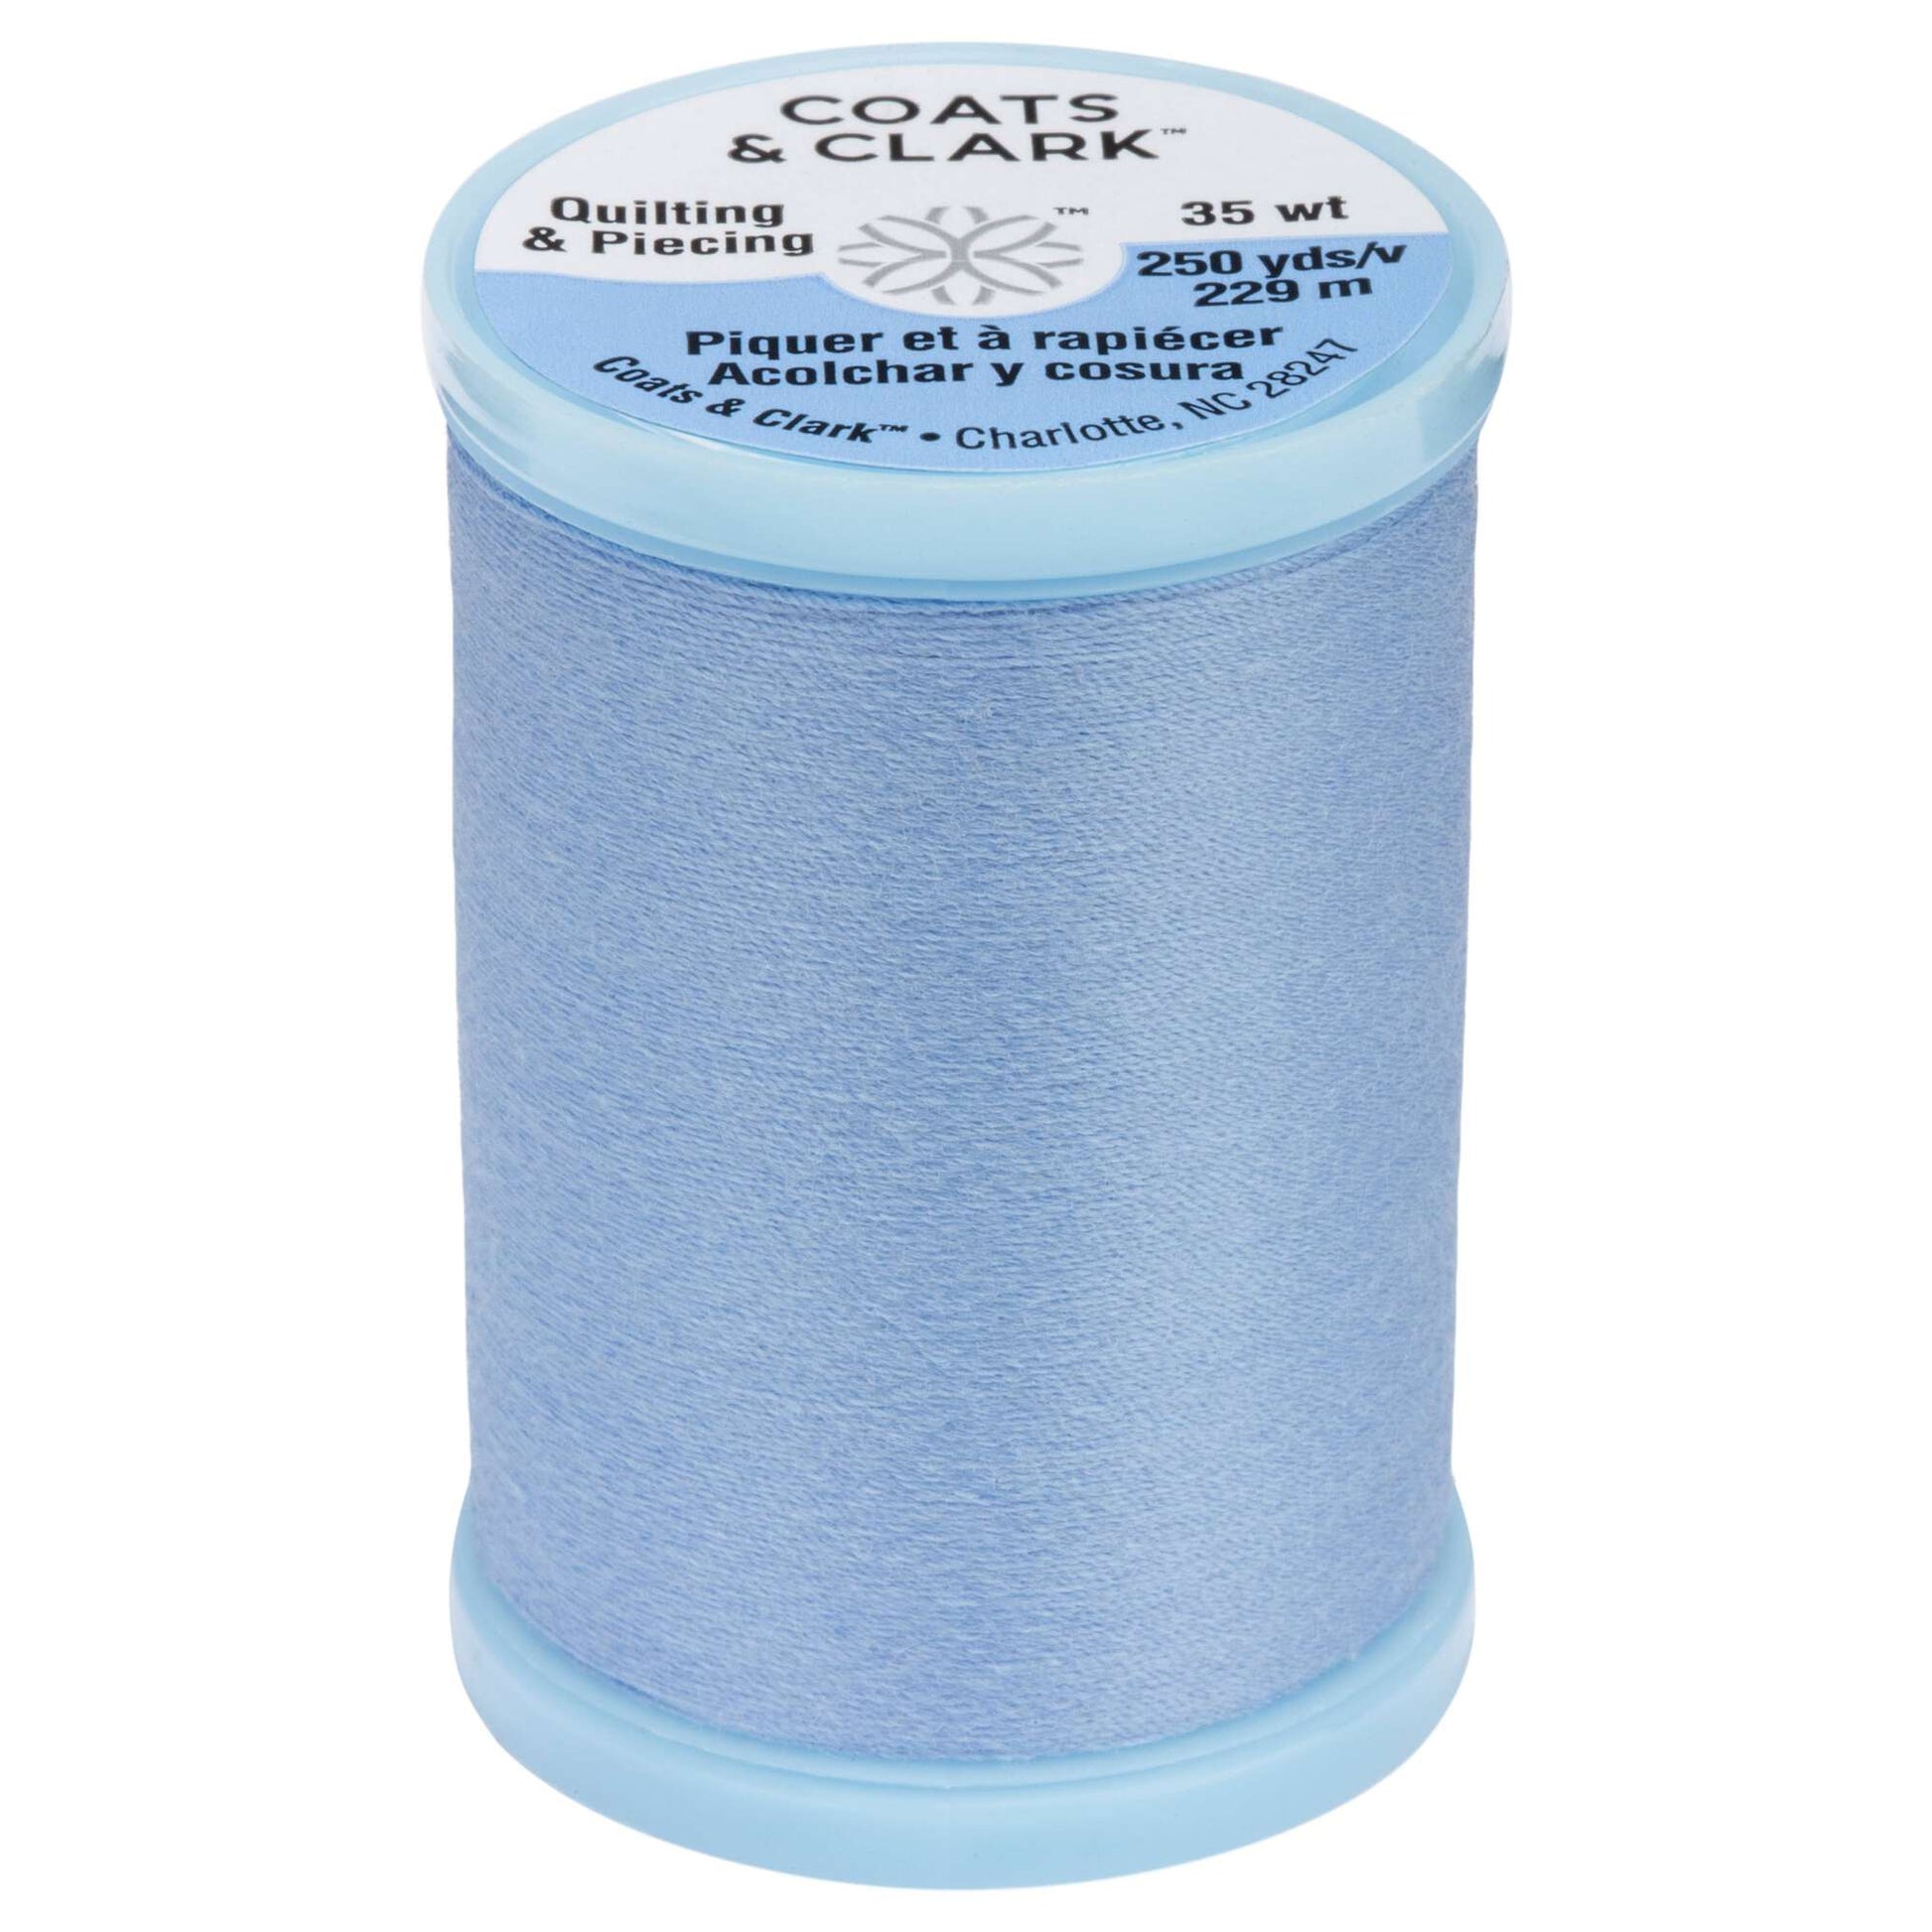 Coats & Clark Cotton Covered Quilting & Piecing Thread (250 Yards) September Sky